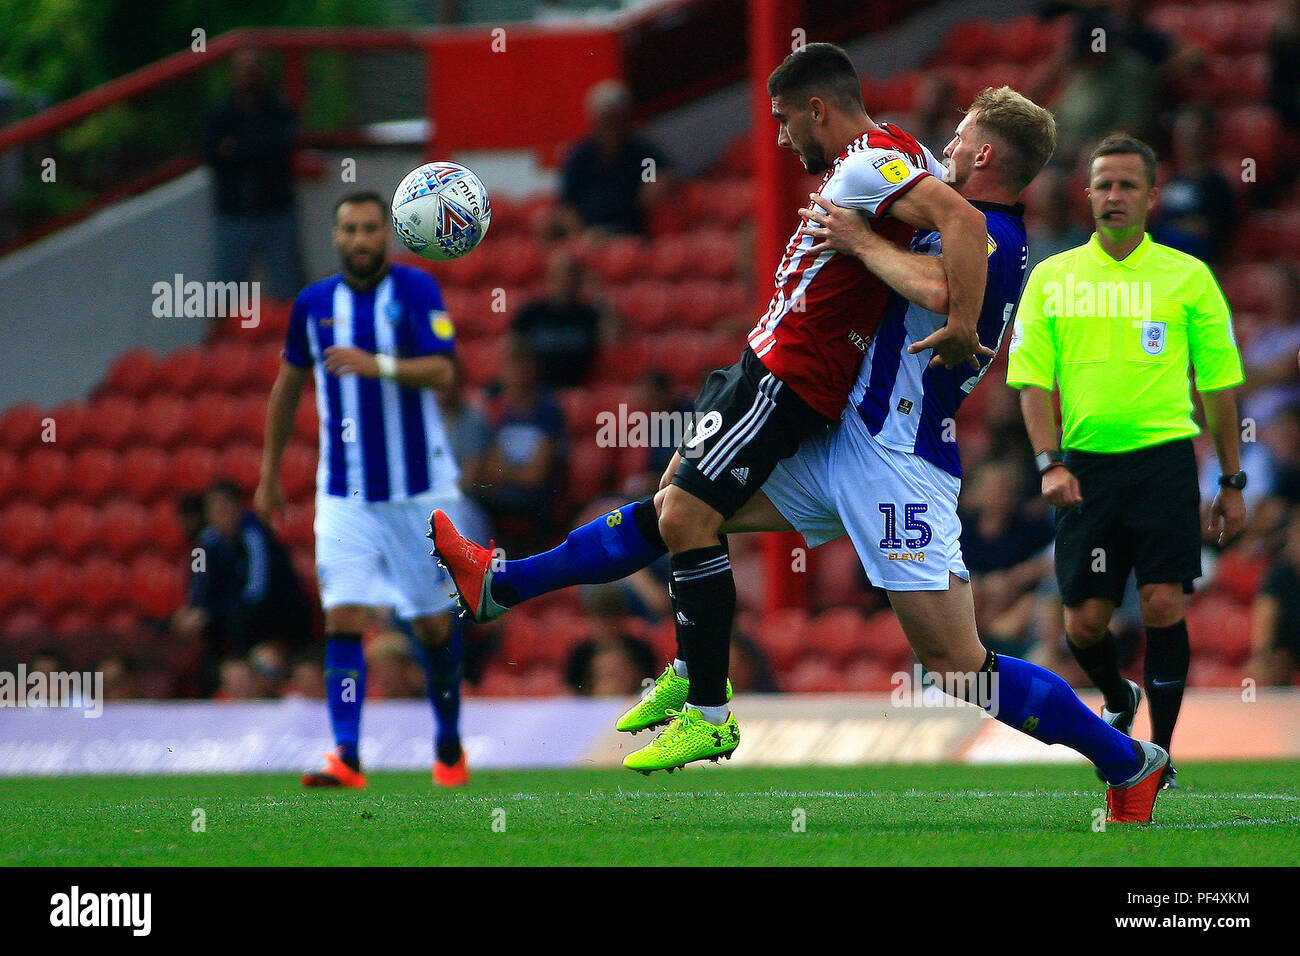 London, UK. 19th Aug, 2018. Editorial use only, license required for commercial use. No use in betting, games or a single club/league/player publications. Neal Maupay of Brentford (R) is tackled by Tom Lees of Sheffield Wednesday (L). EFL Skybet championship match, Brentford v Sheffield Wednesday at Griffin Park stadium in London on Sunday 19th August 2018.  this image may only be used for Editorial purposes. Editorial use only, license required for commercial use. No use in betting, games or a single club/league/player publications. pic by Steffan Bowen/Andrew Orchard sports photography/Alamy Stock Photo